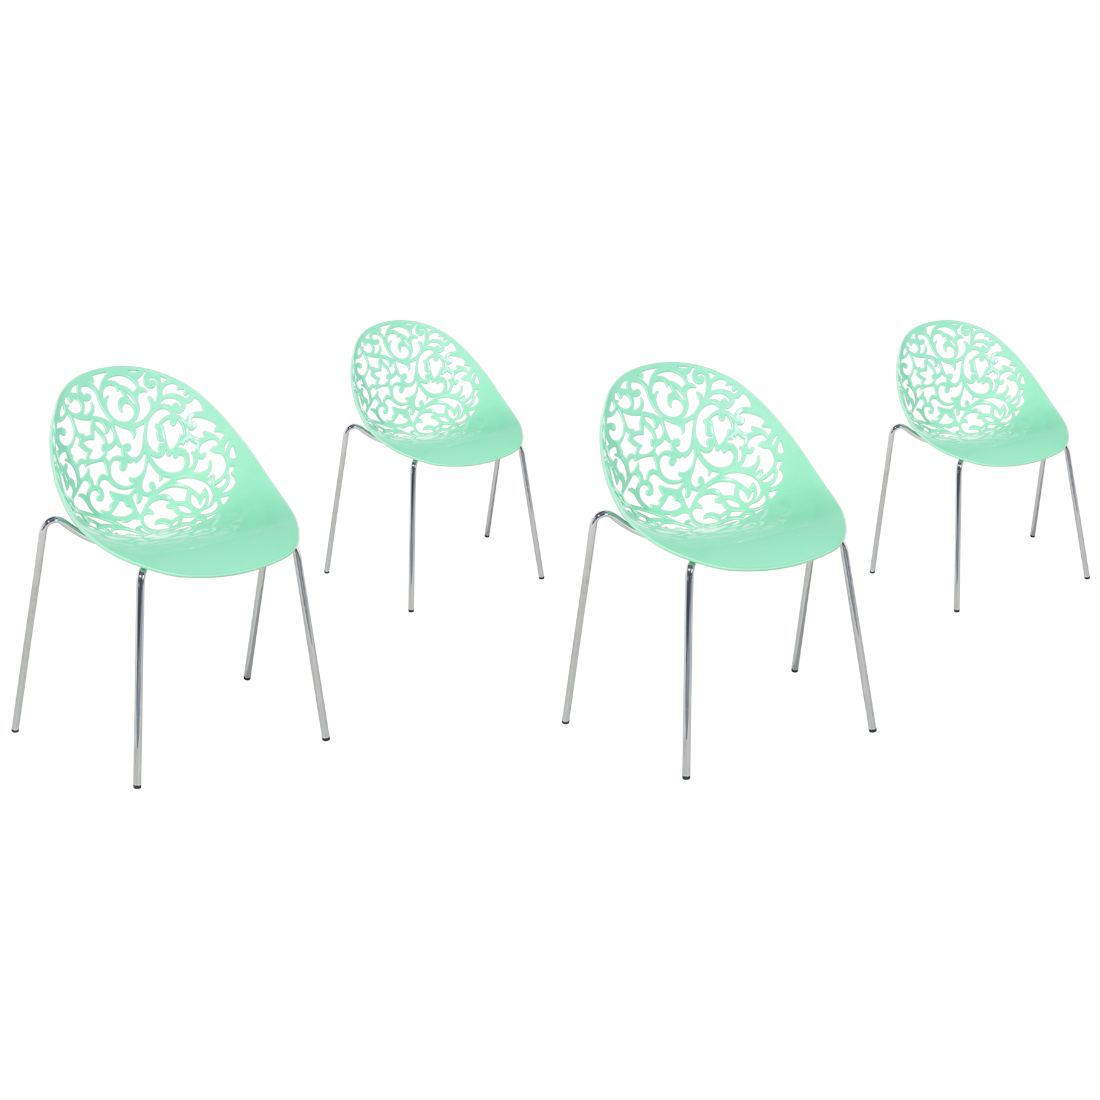 Beliani Set of 4 Dining Chairs Green Plastic Cut Out Modern